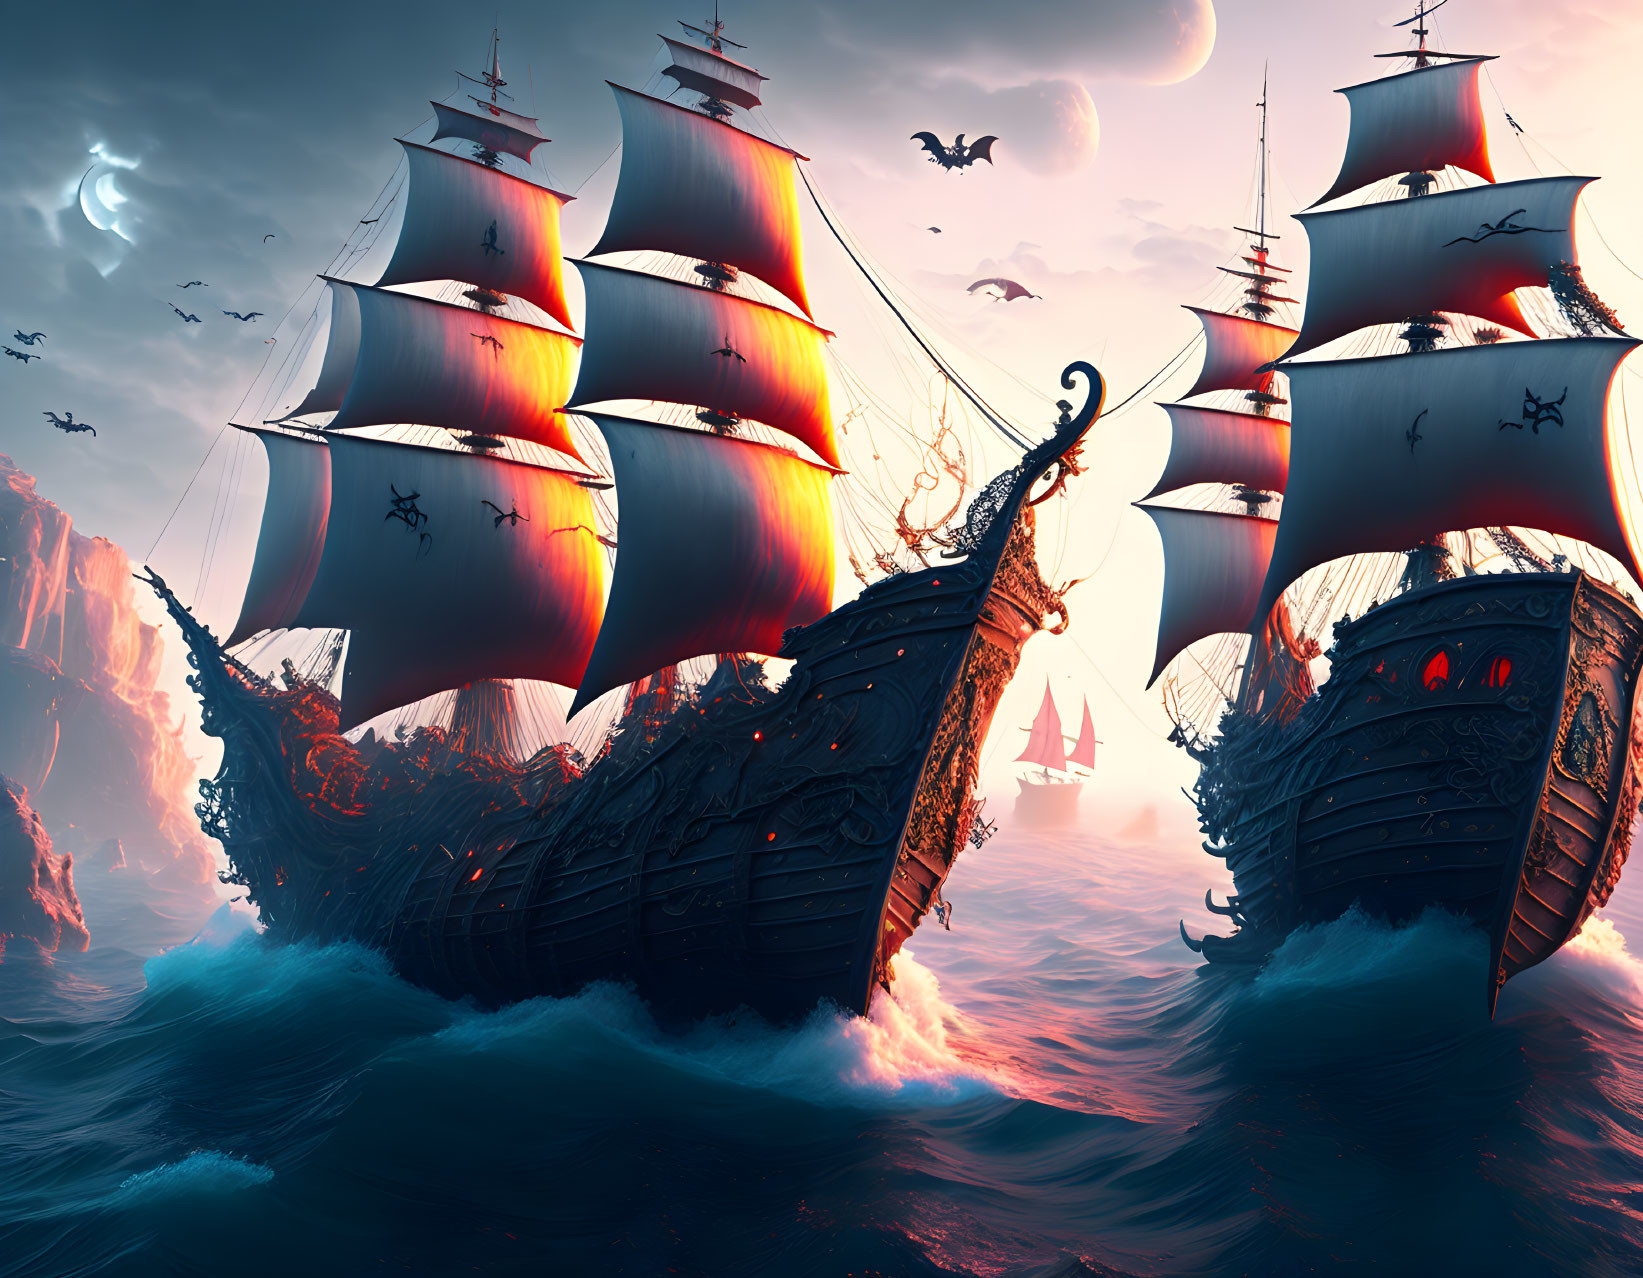 Three majestic sailing ships with elaborate figureheads navigating choppy ocean at sunset.